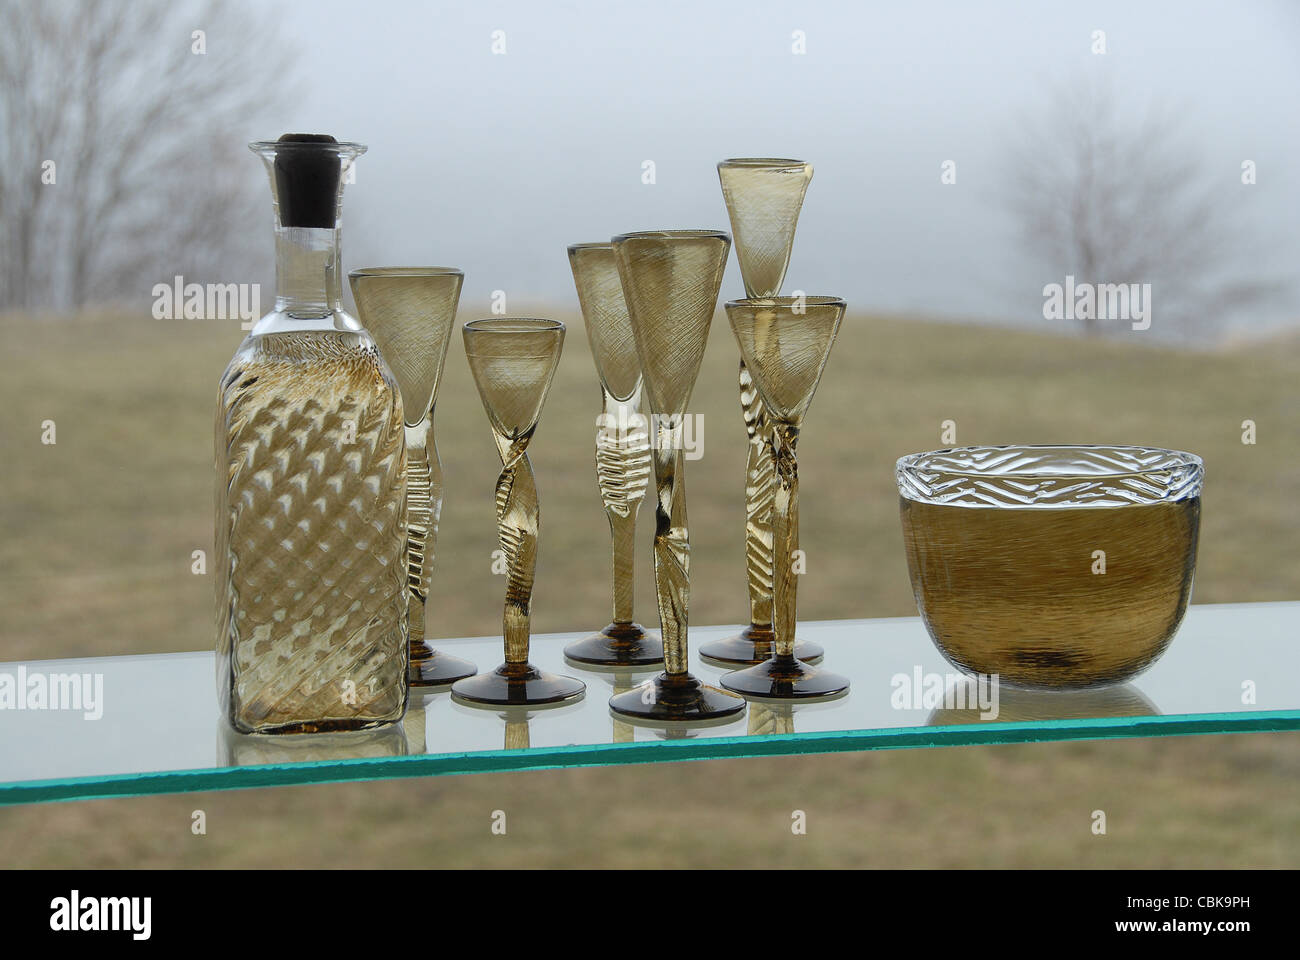 Handcrafted glass by Maibritt Jönsson und Pete Hunner of Baltic Sea Glass  at Gudhjem on the Baltic Sea island of Bornholm Stock Photo - Alamy